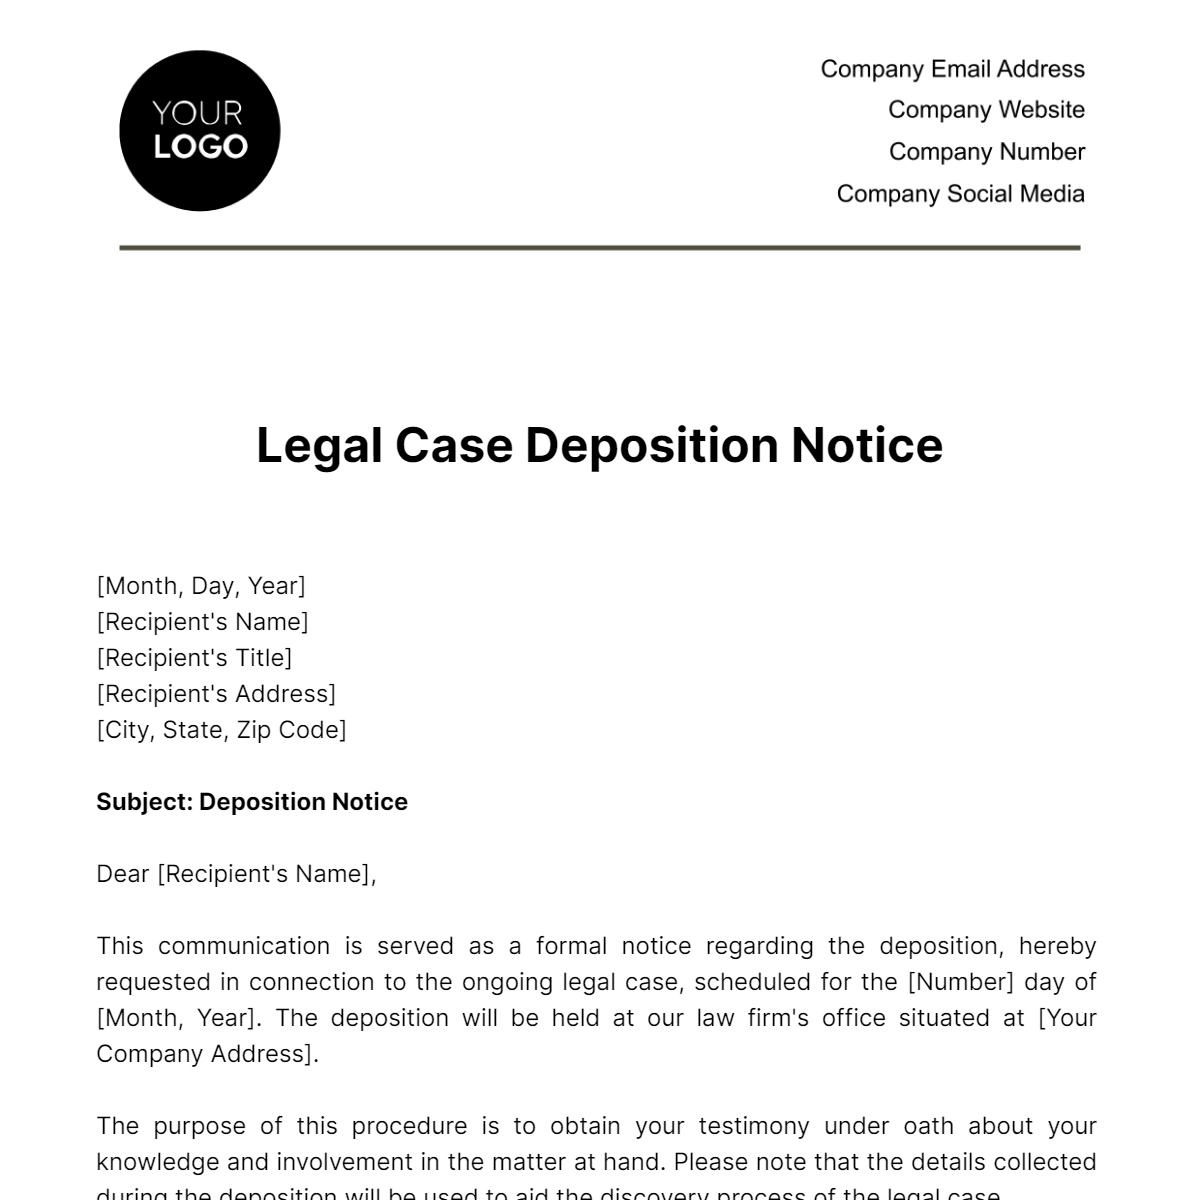 Free Legal Case Deposition Notice Template